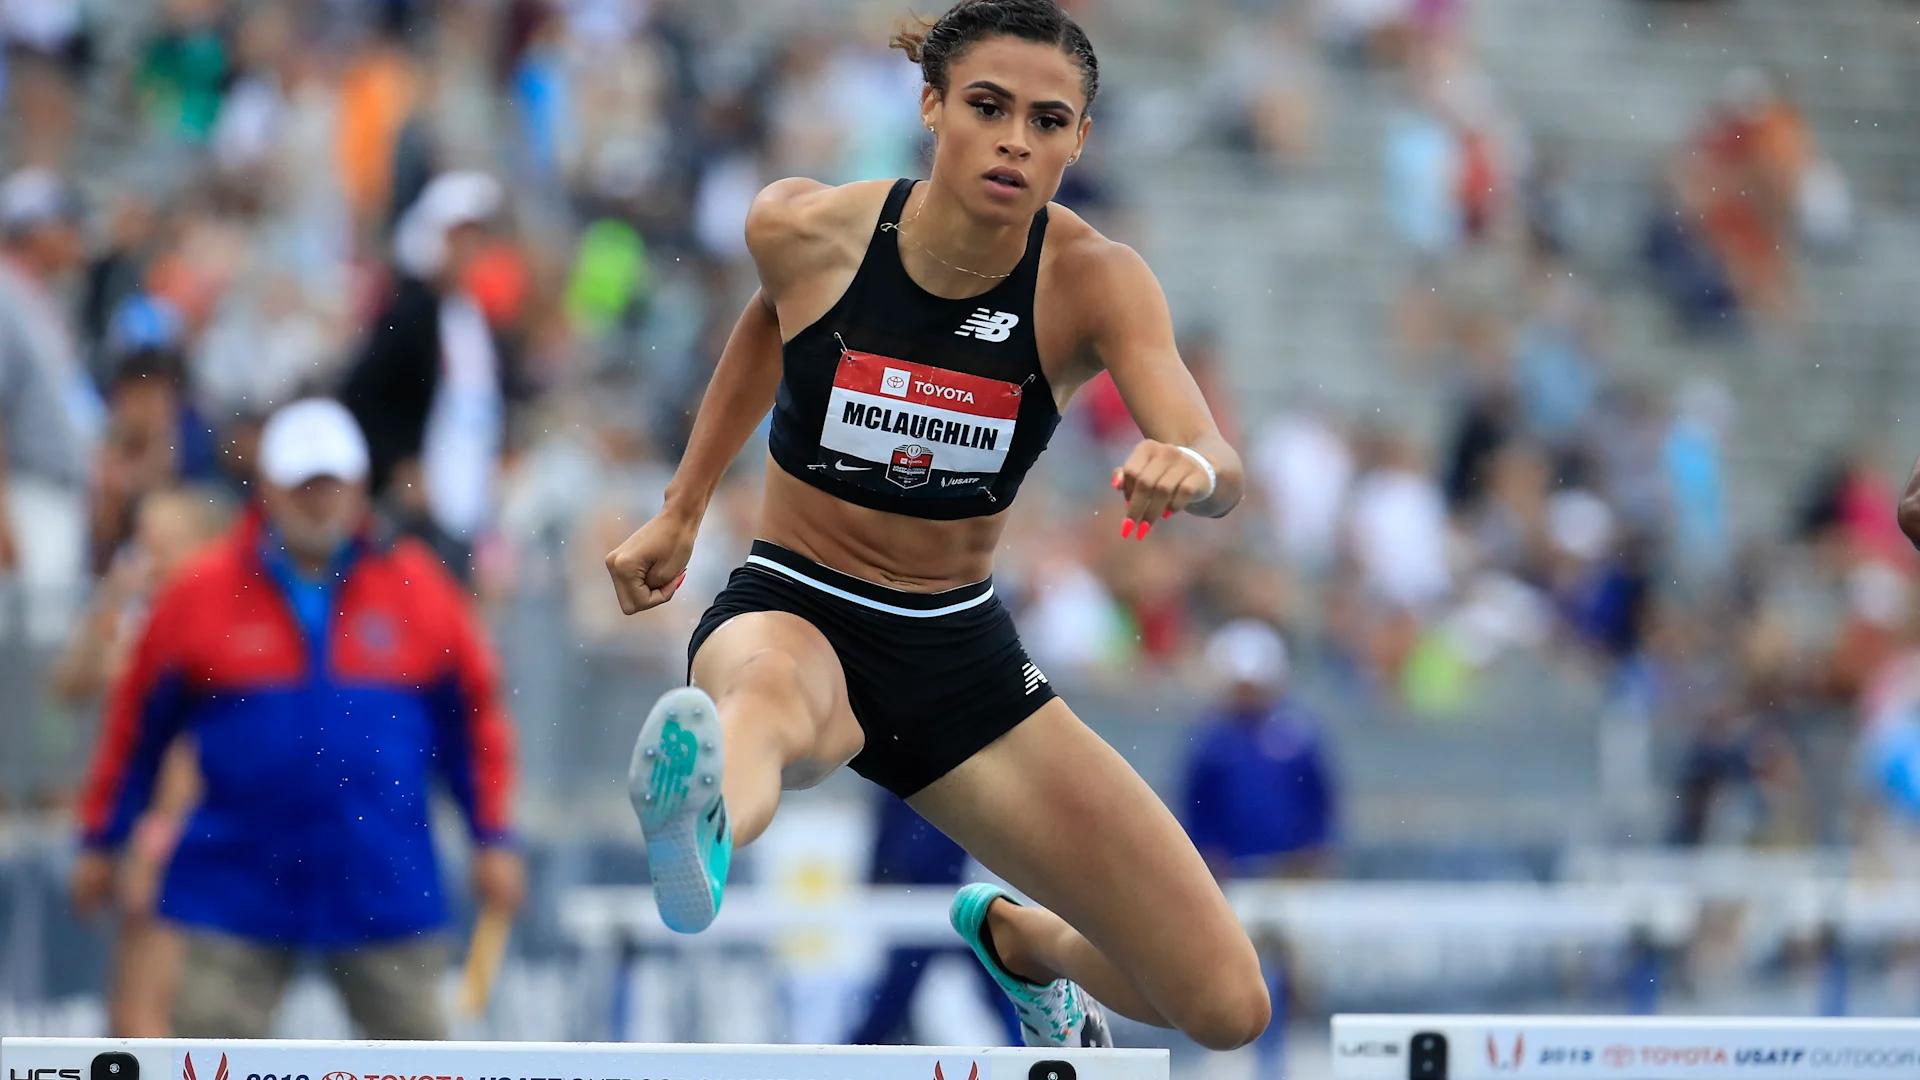 Sydney McLaughlin in action (McLaughlin in a file photo; Credits - Twitter)